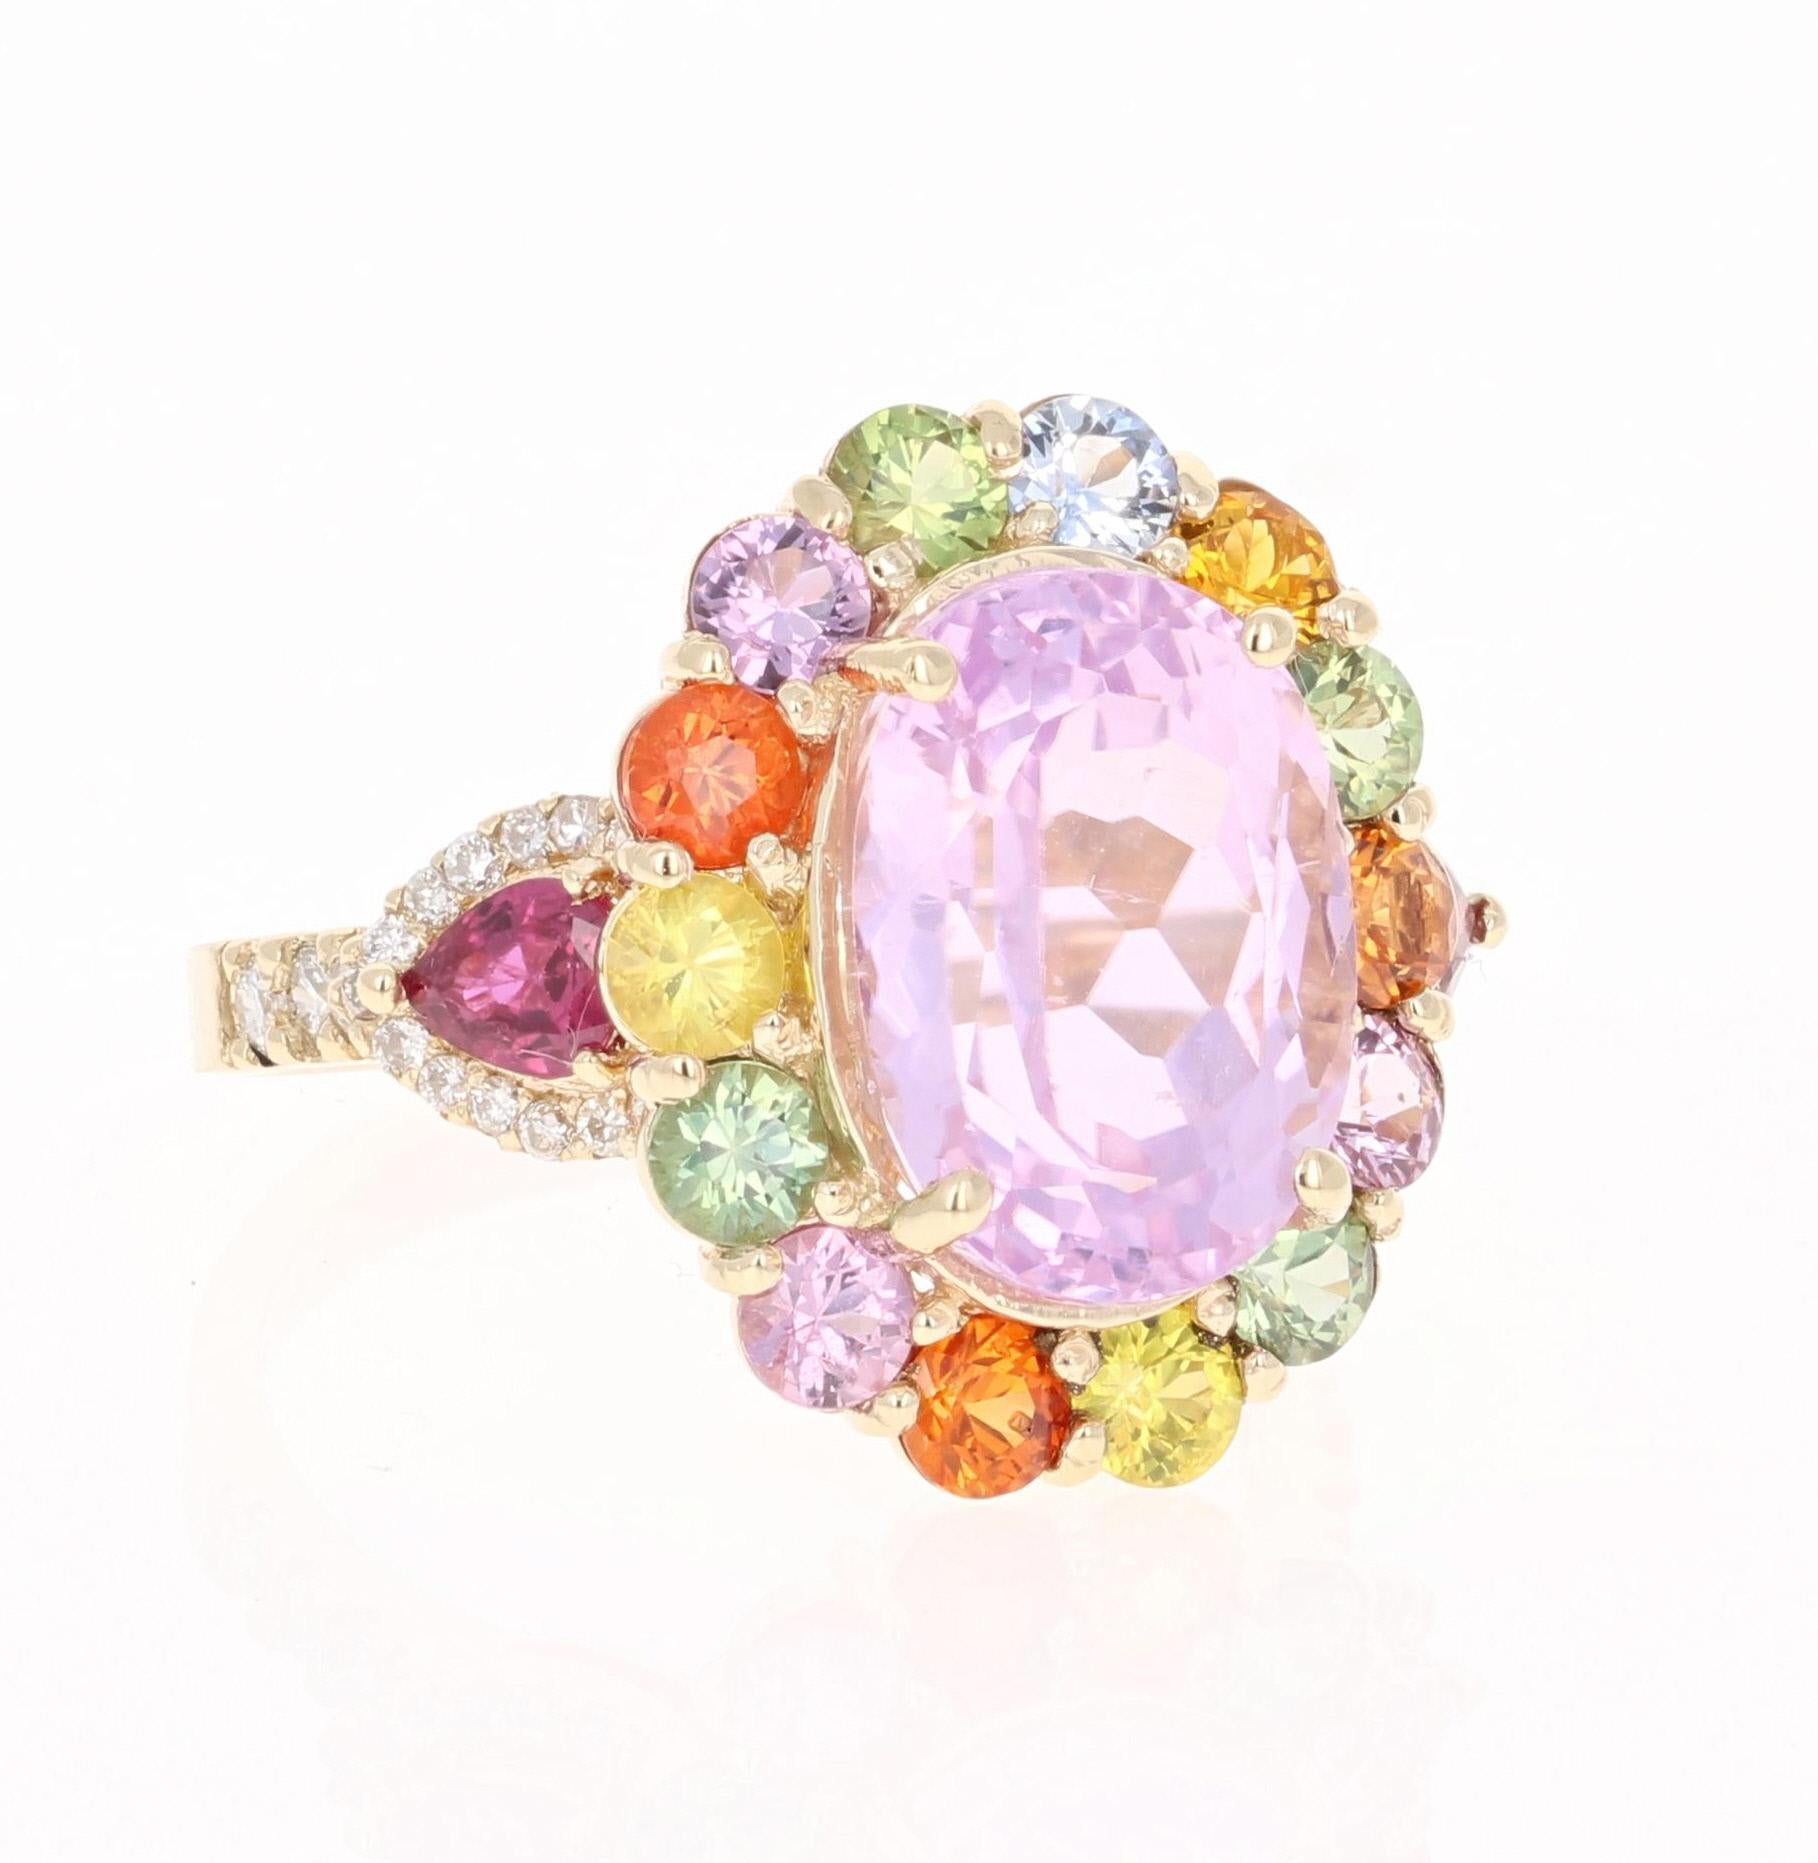 Super gorgeous and uniquely designed 9.81 Carat Kunzite and Multi-Colored Sapphire Diamond 14K Yellow Gold Cocktail Ring!

This ring has a 6.81 carat Oval Cut Pinkish-Mauve Kunzite and is elegantly surrounded by 14 Round Cut Multi-Colored Sapphires